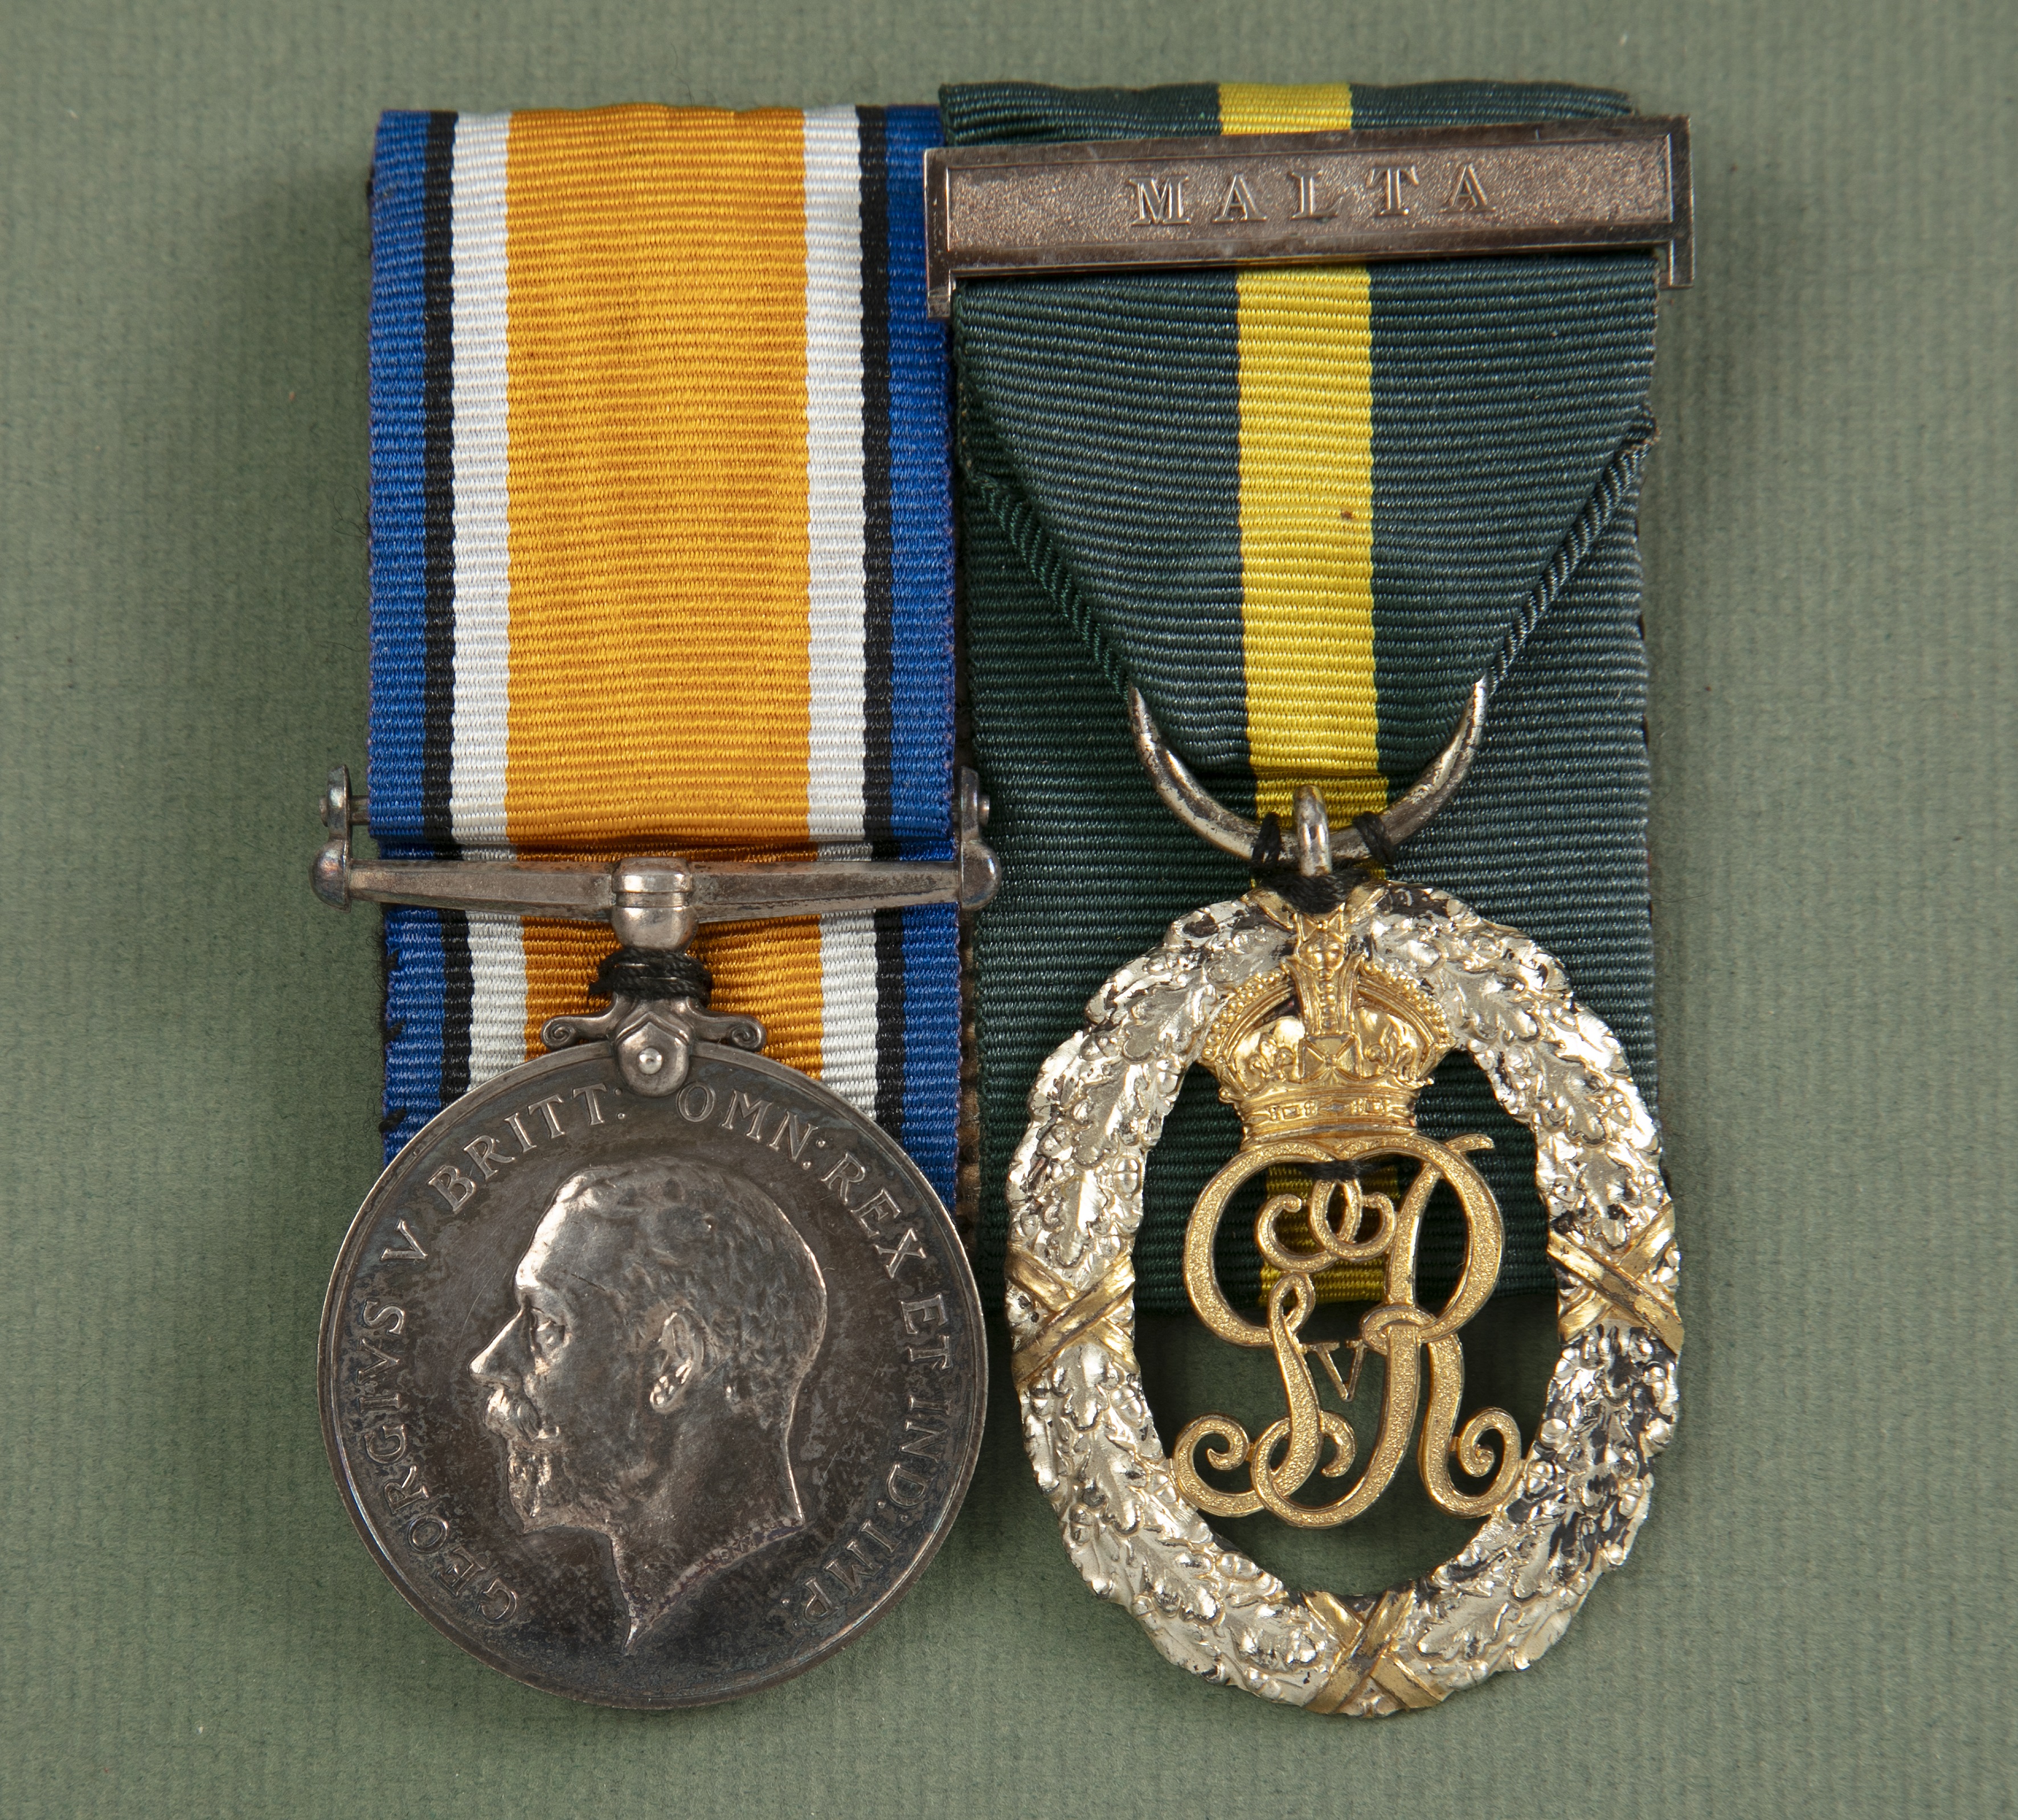 WWI and WWII campaign medals awarded to Captain R Ingham to include an MBE and miniatures, - Image 4 of 4